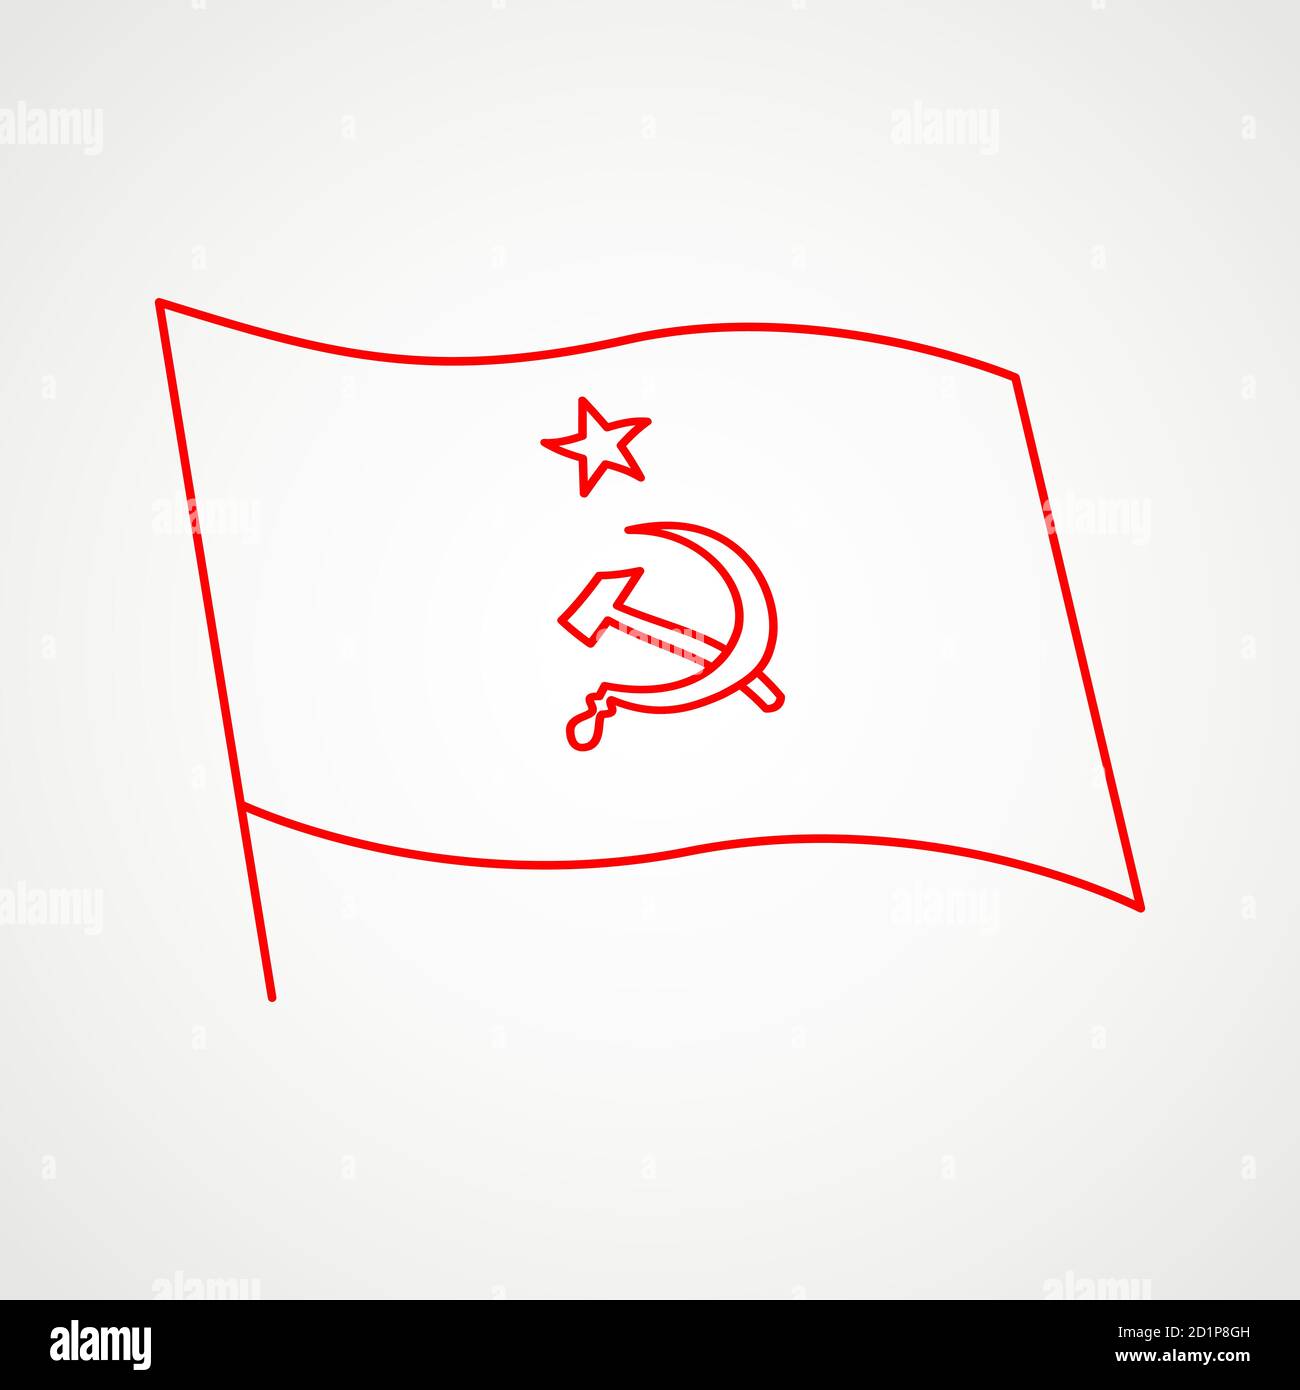 Linear icon of the communist flag with soviet emblem. Hammer and sickle with a star. Red Soviet emblem. Minimalist coat of arms of the USSR. Vector Stock Vector